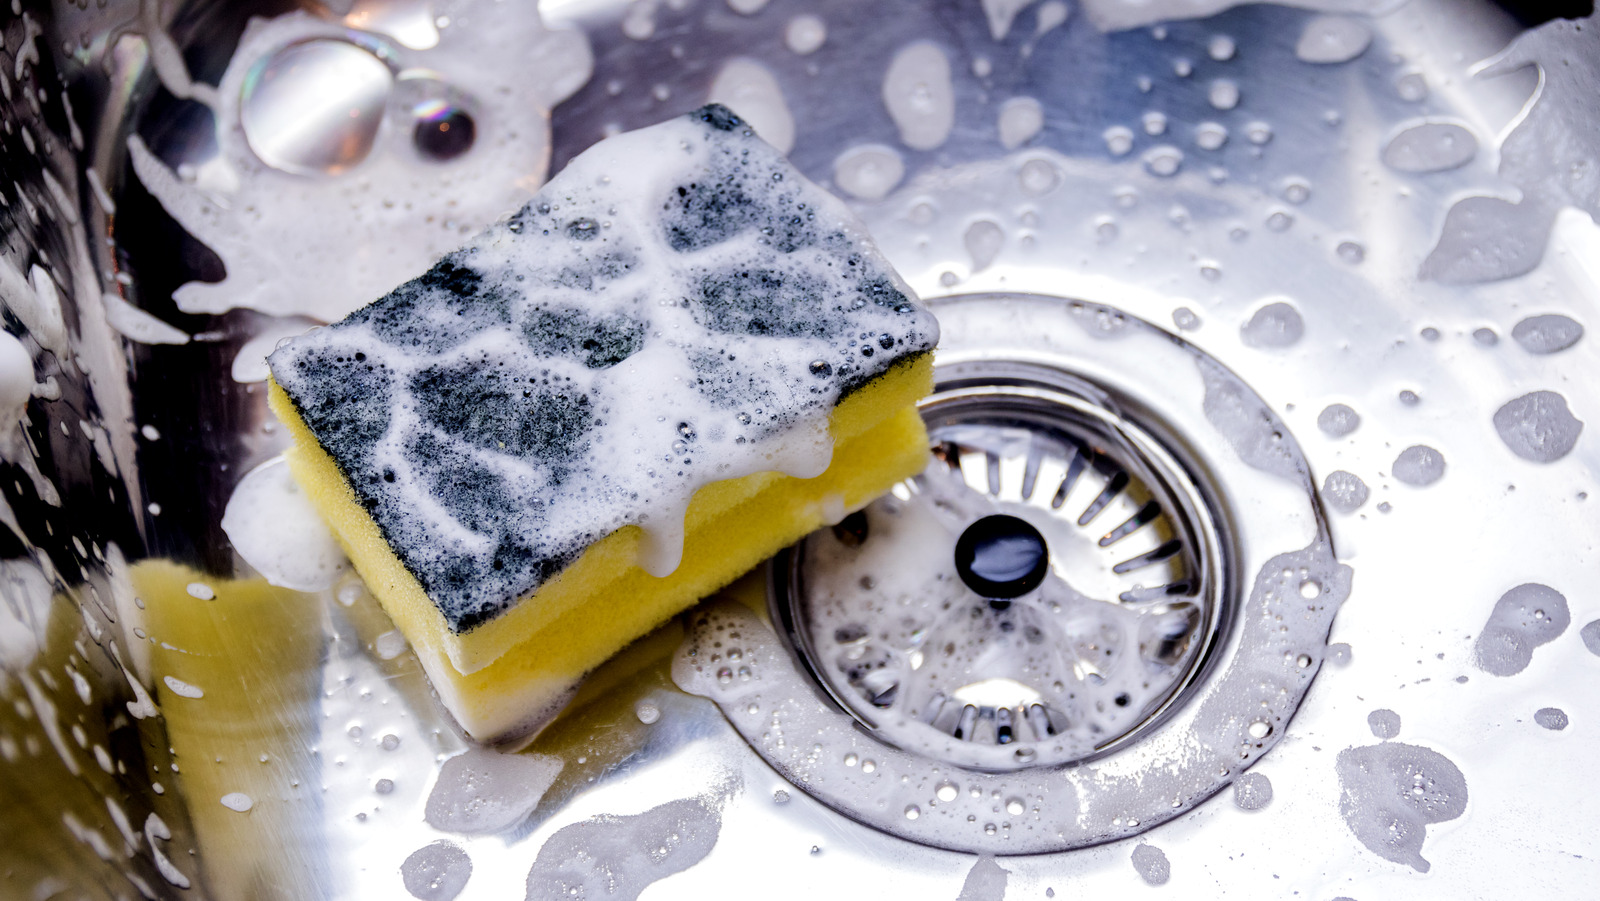 https://www.housedigest.com/img/gallery/how-to-store-your-wet-sponges-so-they-dont-get-stinky/l-intro-1688171207.jpg